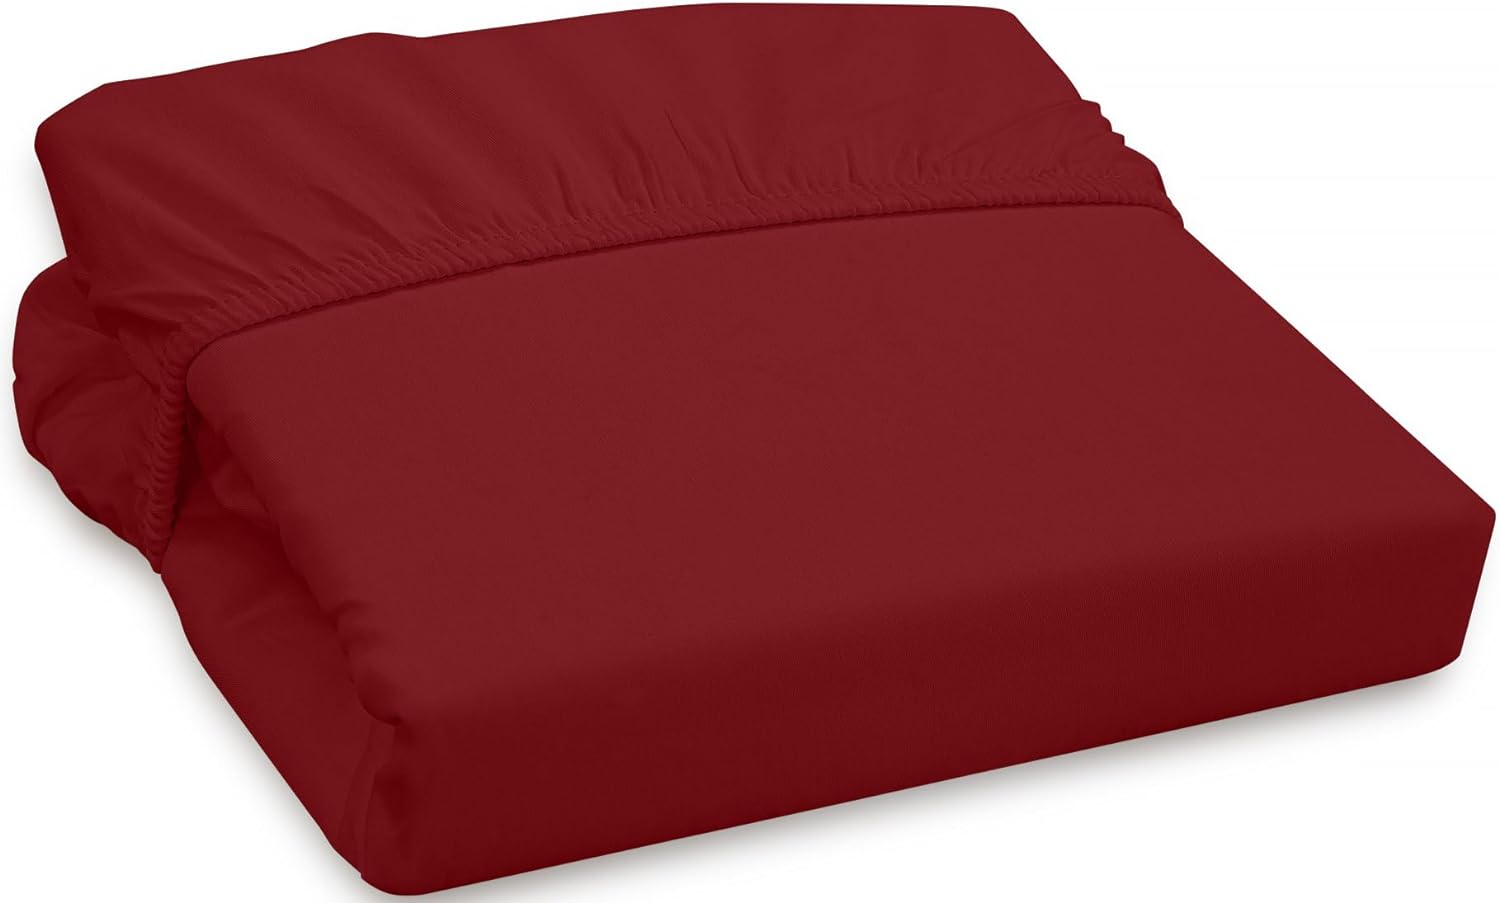 ROYALE LINENS 300 Thread Count 100% Long Staple Combed Cotton Fitted Sheet - Super Soft Deep Pocket Bottom Sheet - Red Fitted Sheet Queen Size - Queen Fitted Sheet Only - Elastic Sheet (Queen,Red)